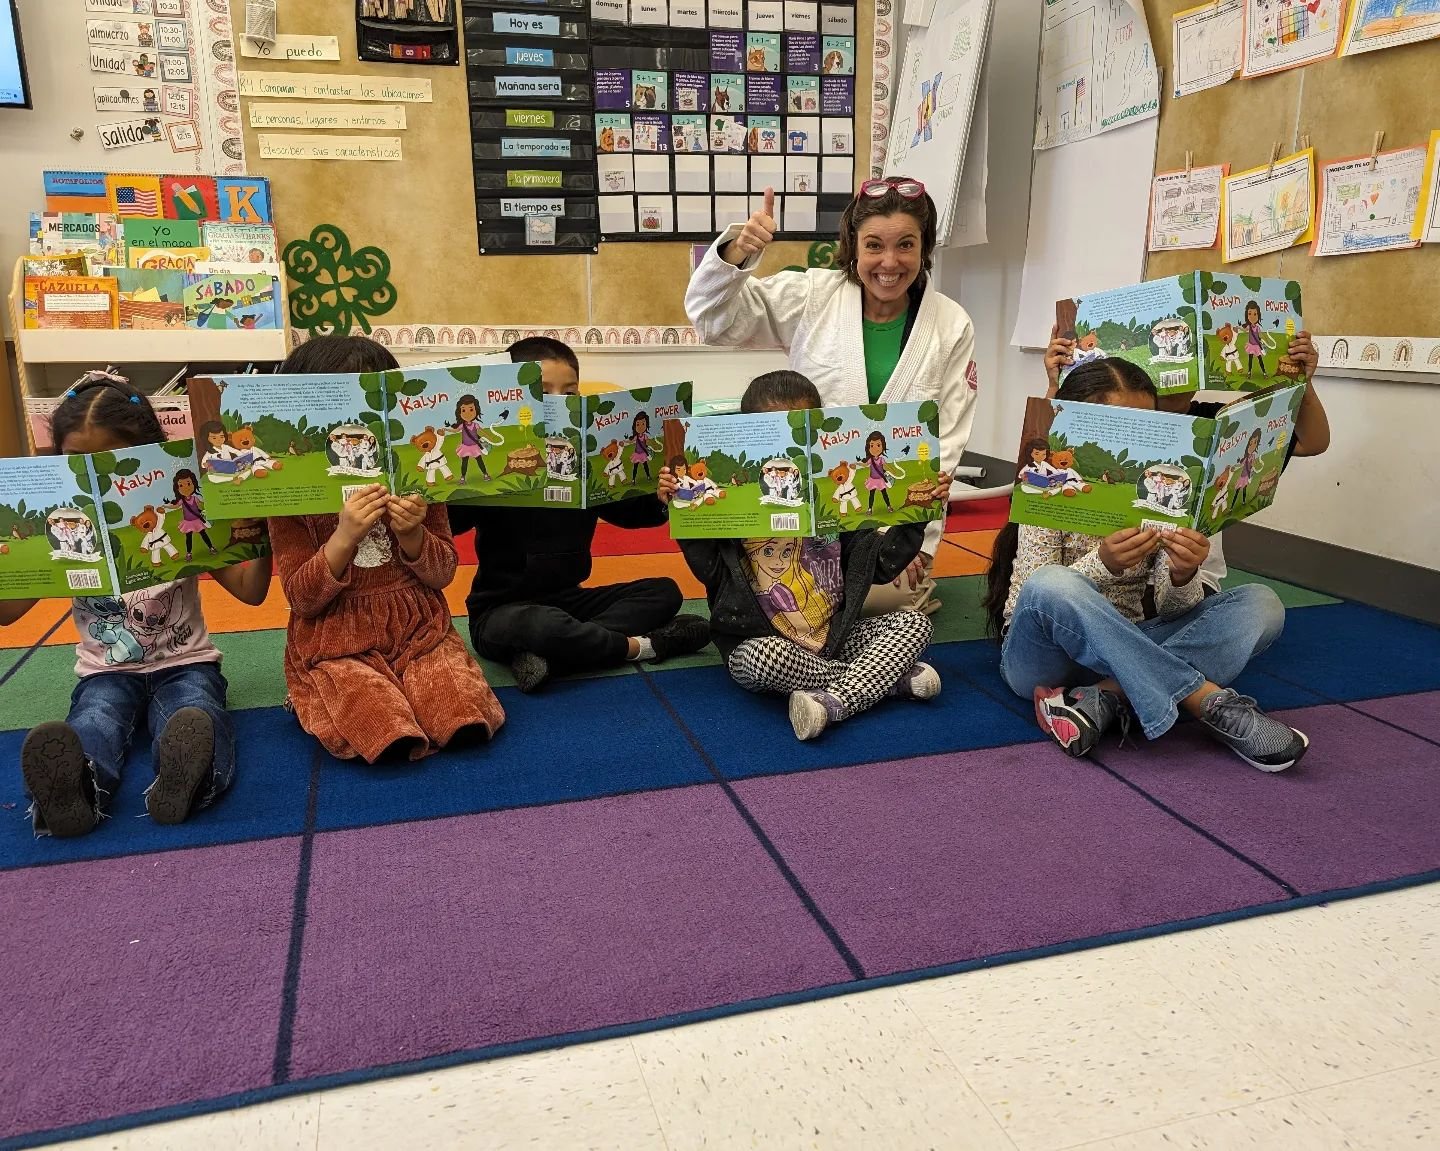 Kalyn Finds Her Power 📚
Special delivery for these hard working kindergarten students at Lemonwood School in Oxnard, CA. 

Thank you @vicgracie for your magical story!